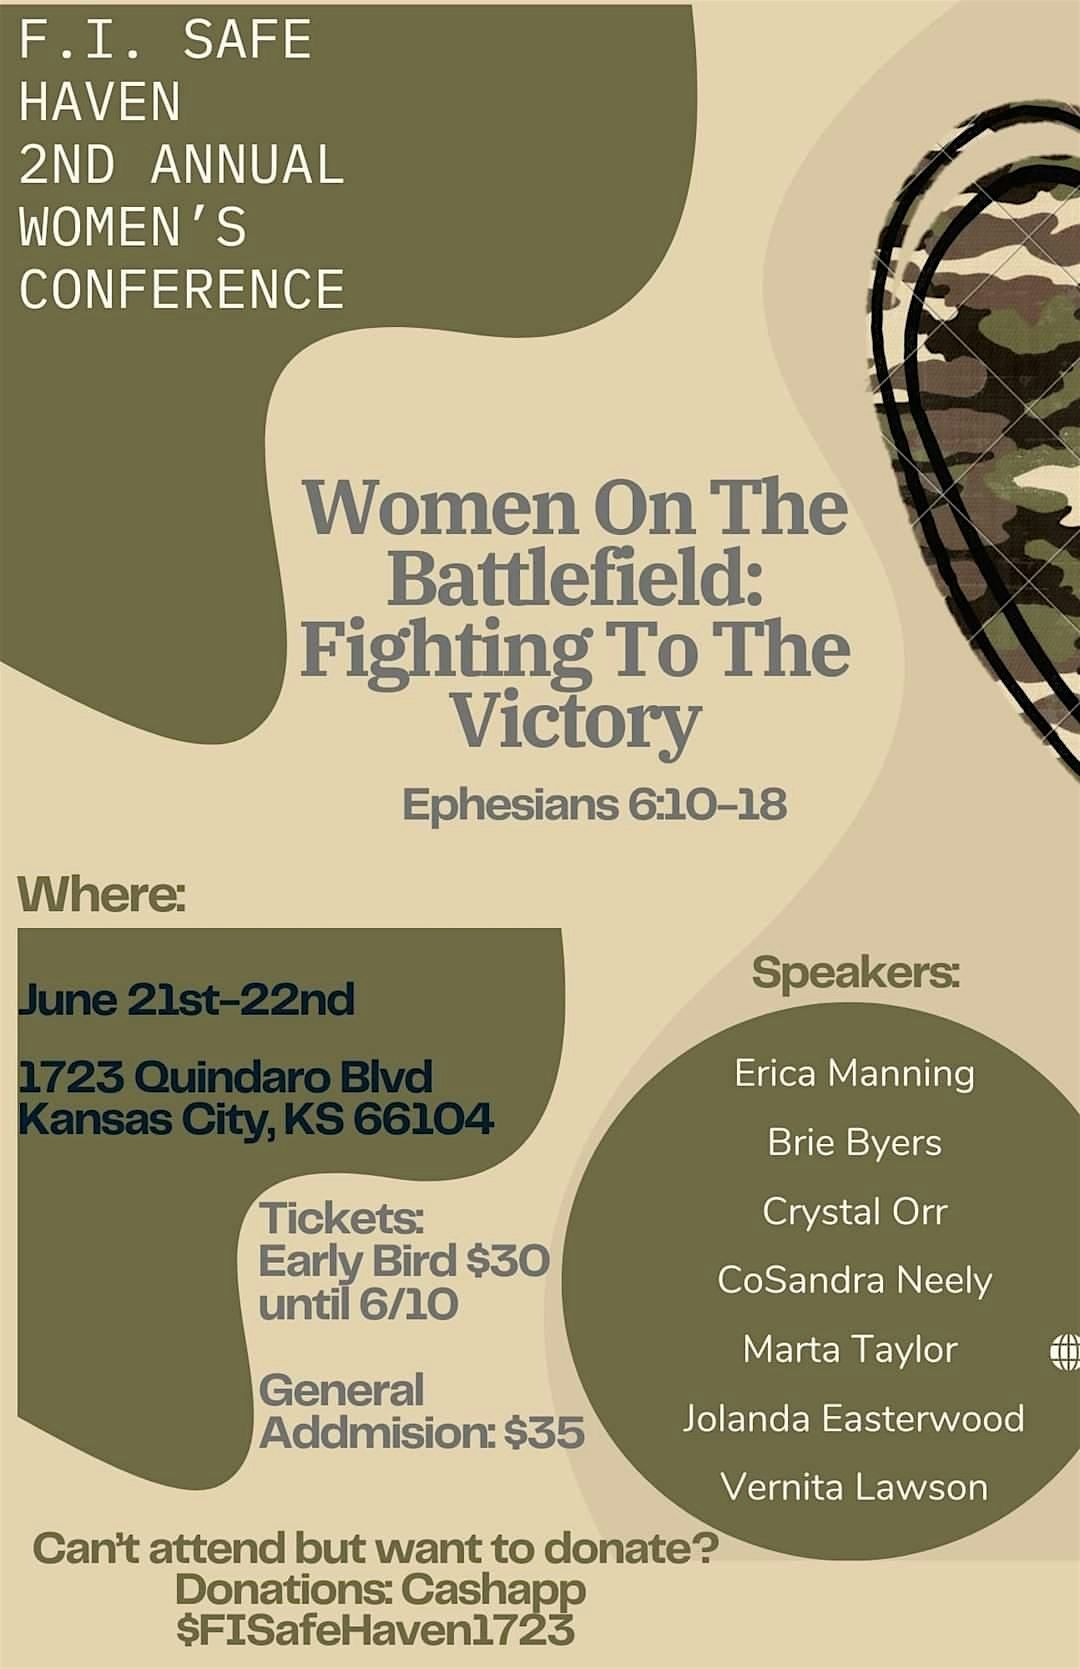 Women on the Battlefield: Fighting to the Victory